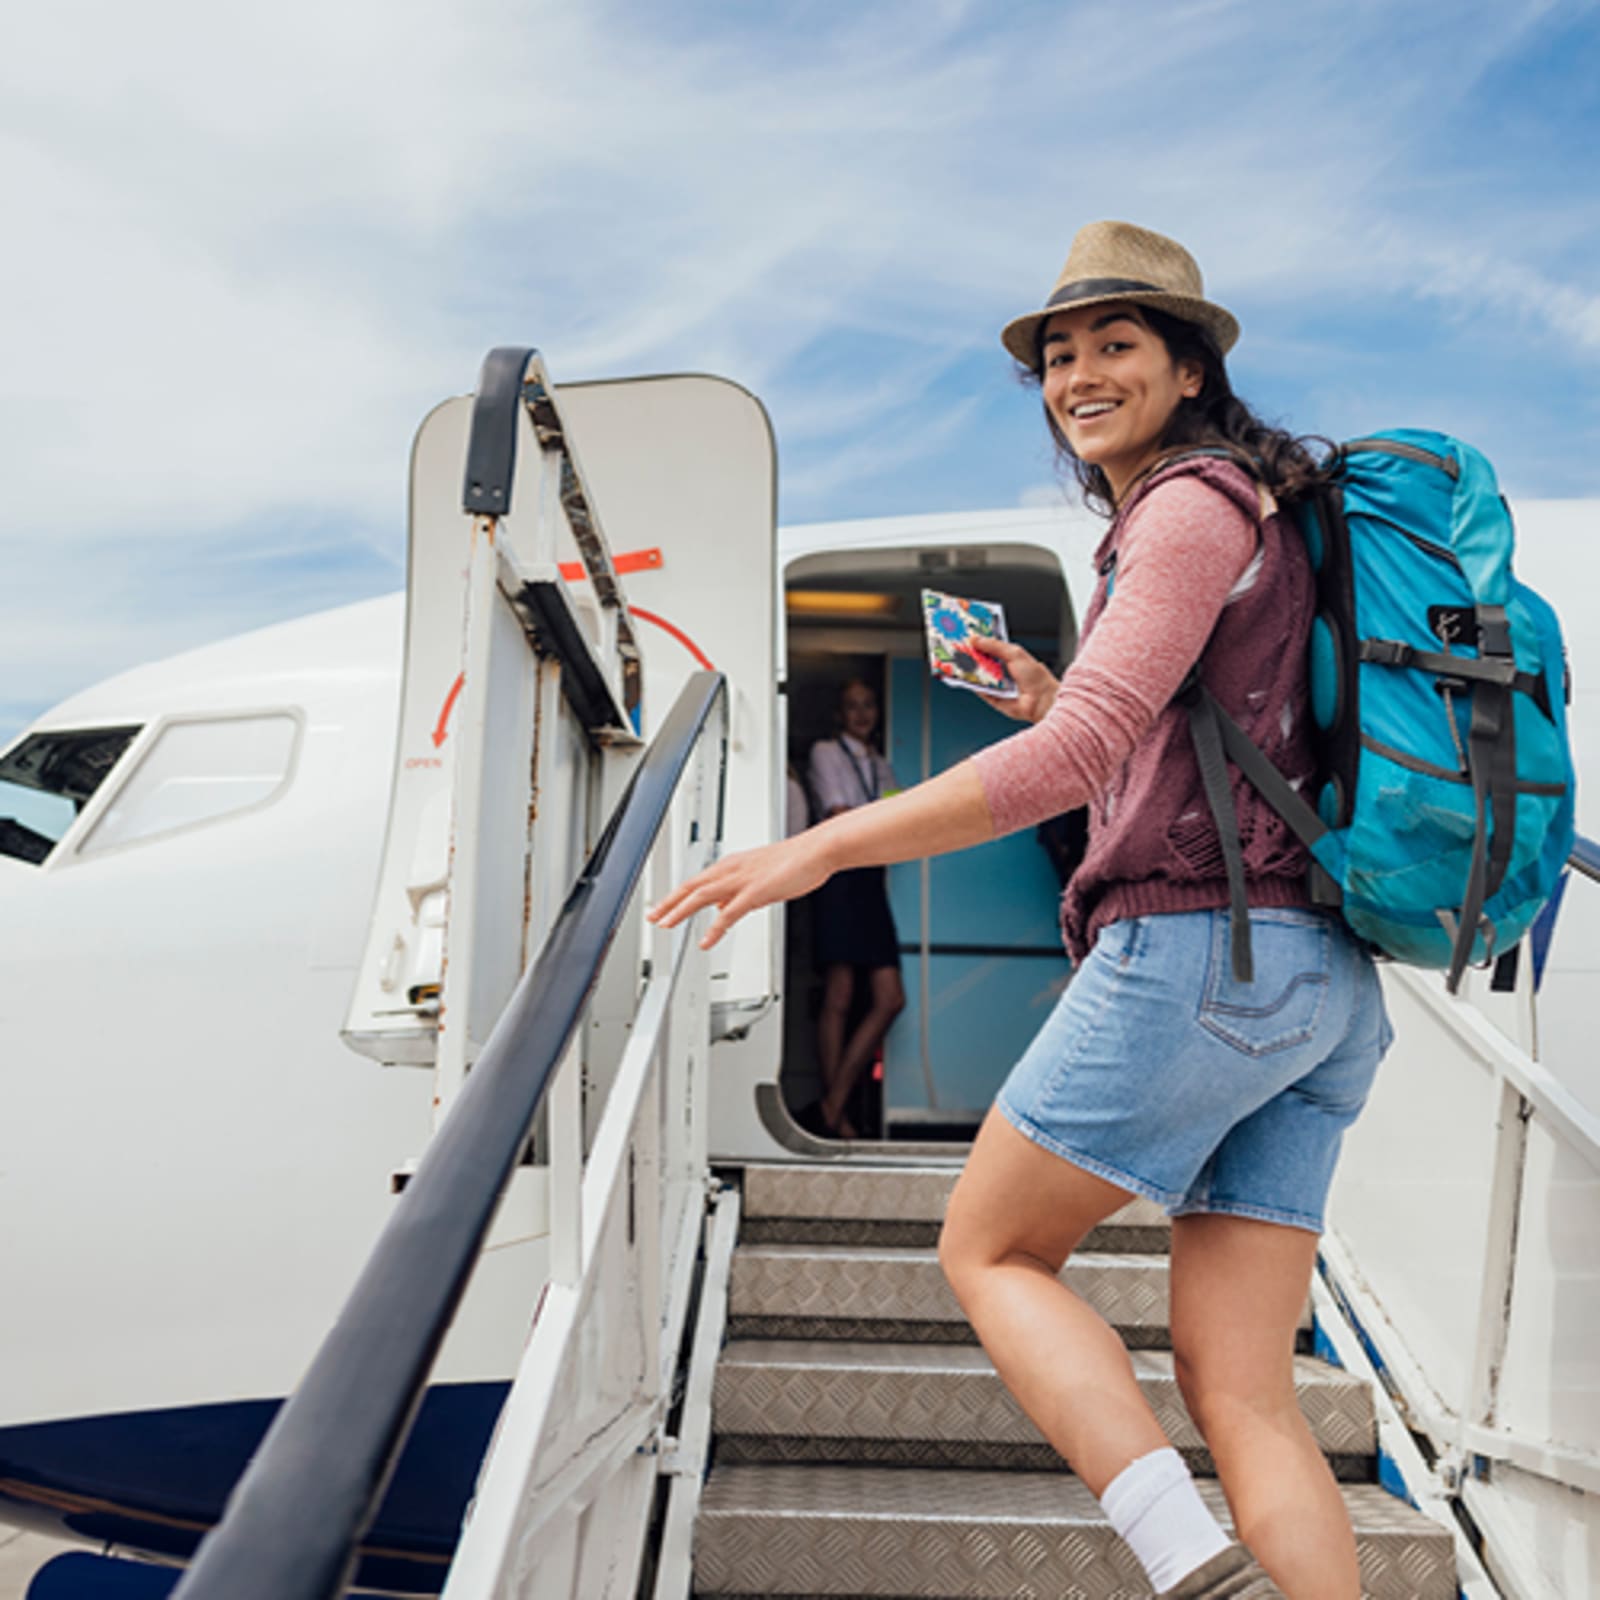 Woman smiling wearing a blue backpack, walking up the steps to board a plane